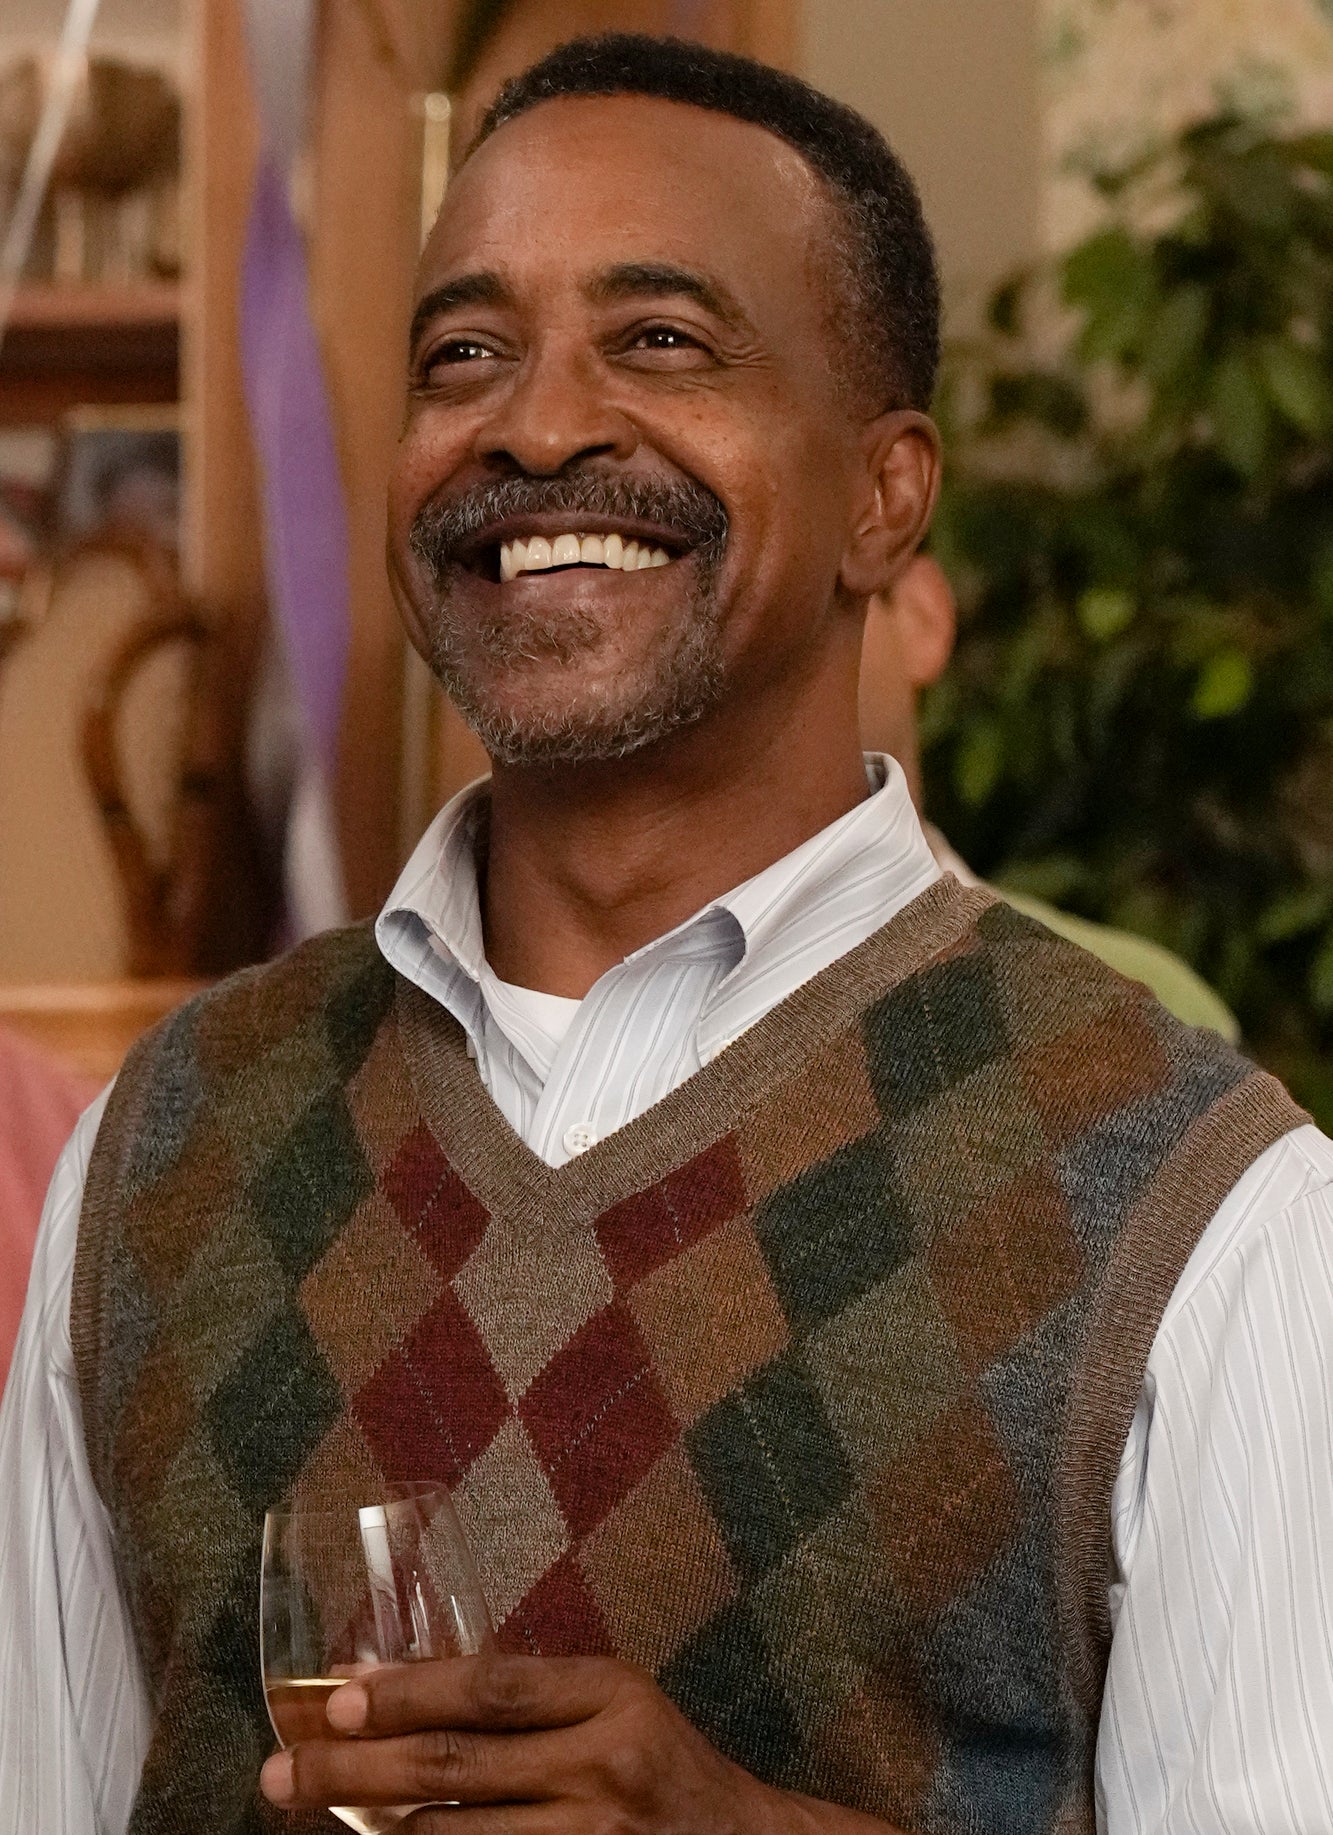 closeup of him wearing the same sweater vest and holding a glass of wine